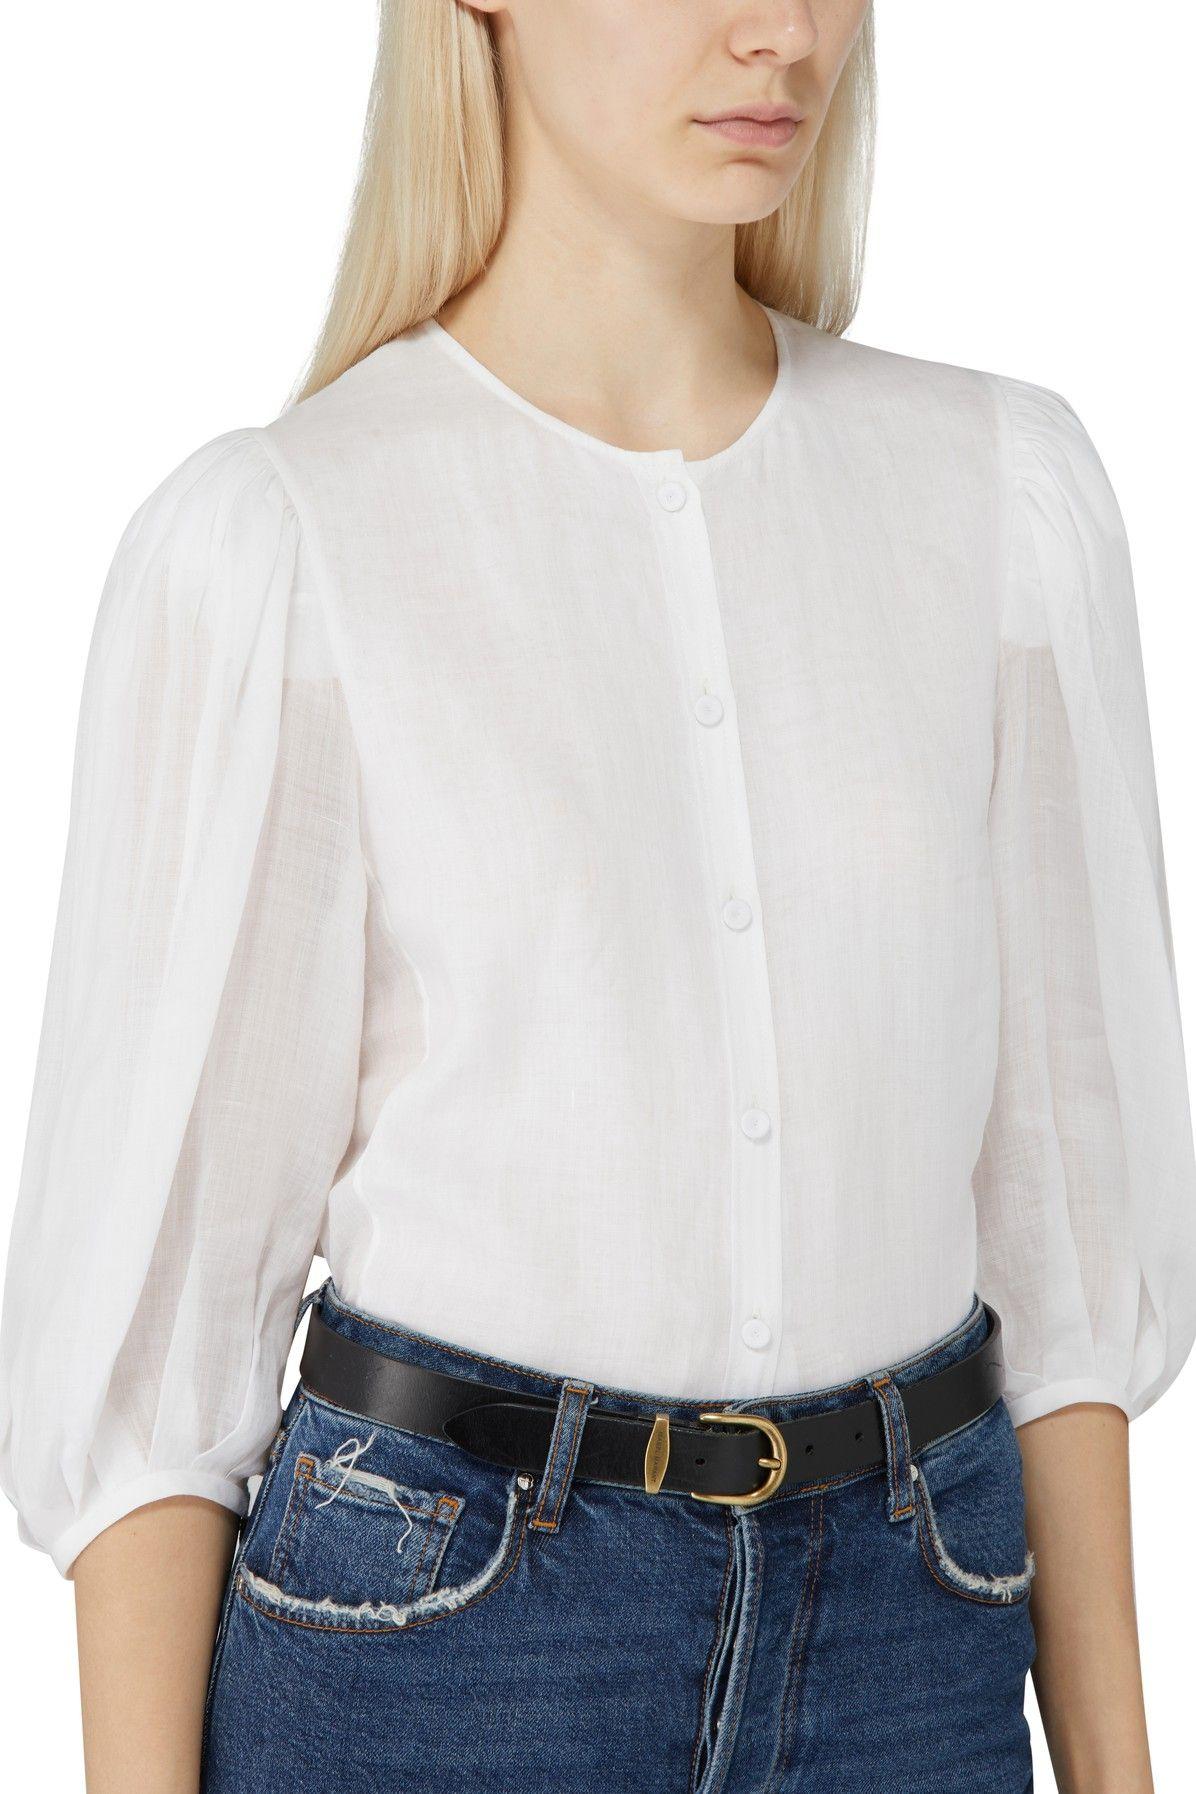 Chloé Blouse With Balloon Sleeves in White | Lyst